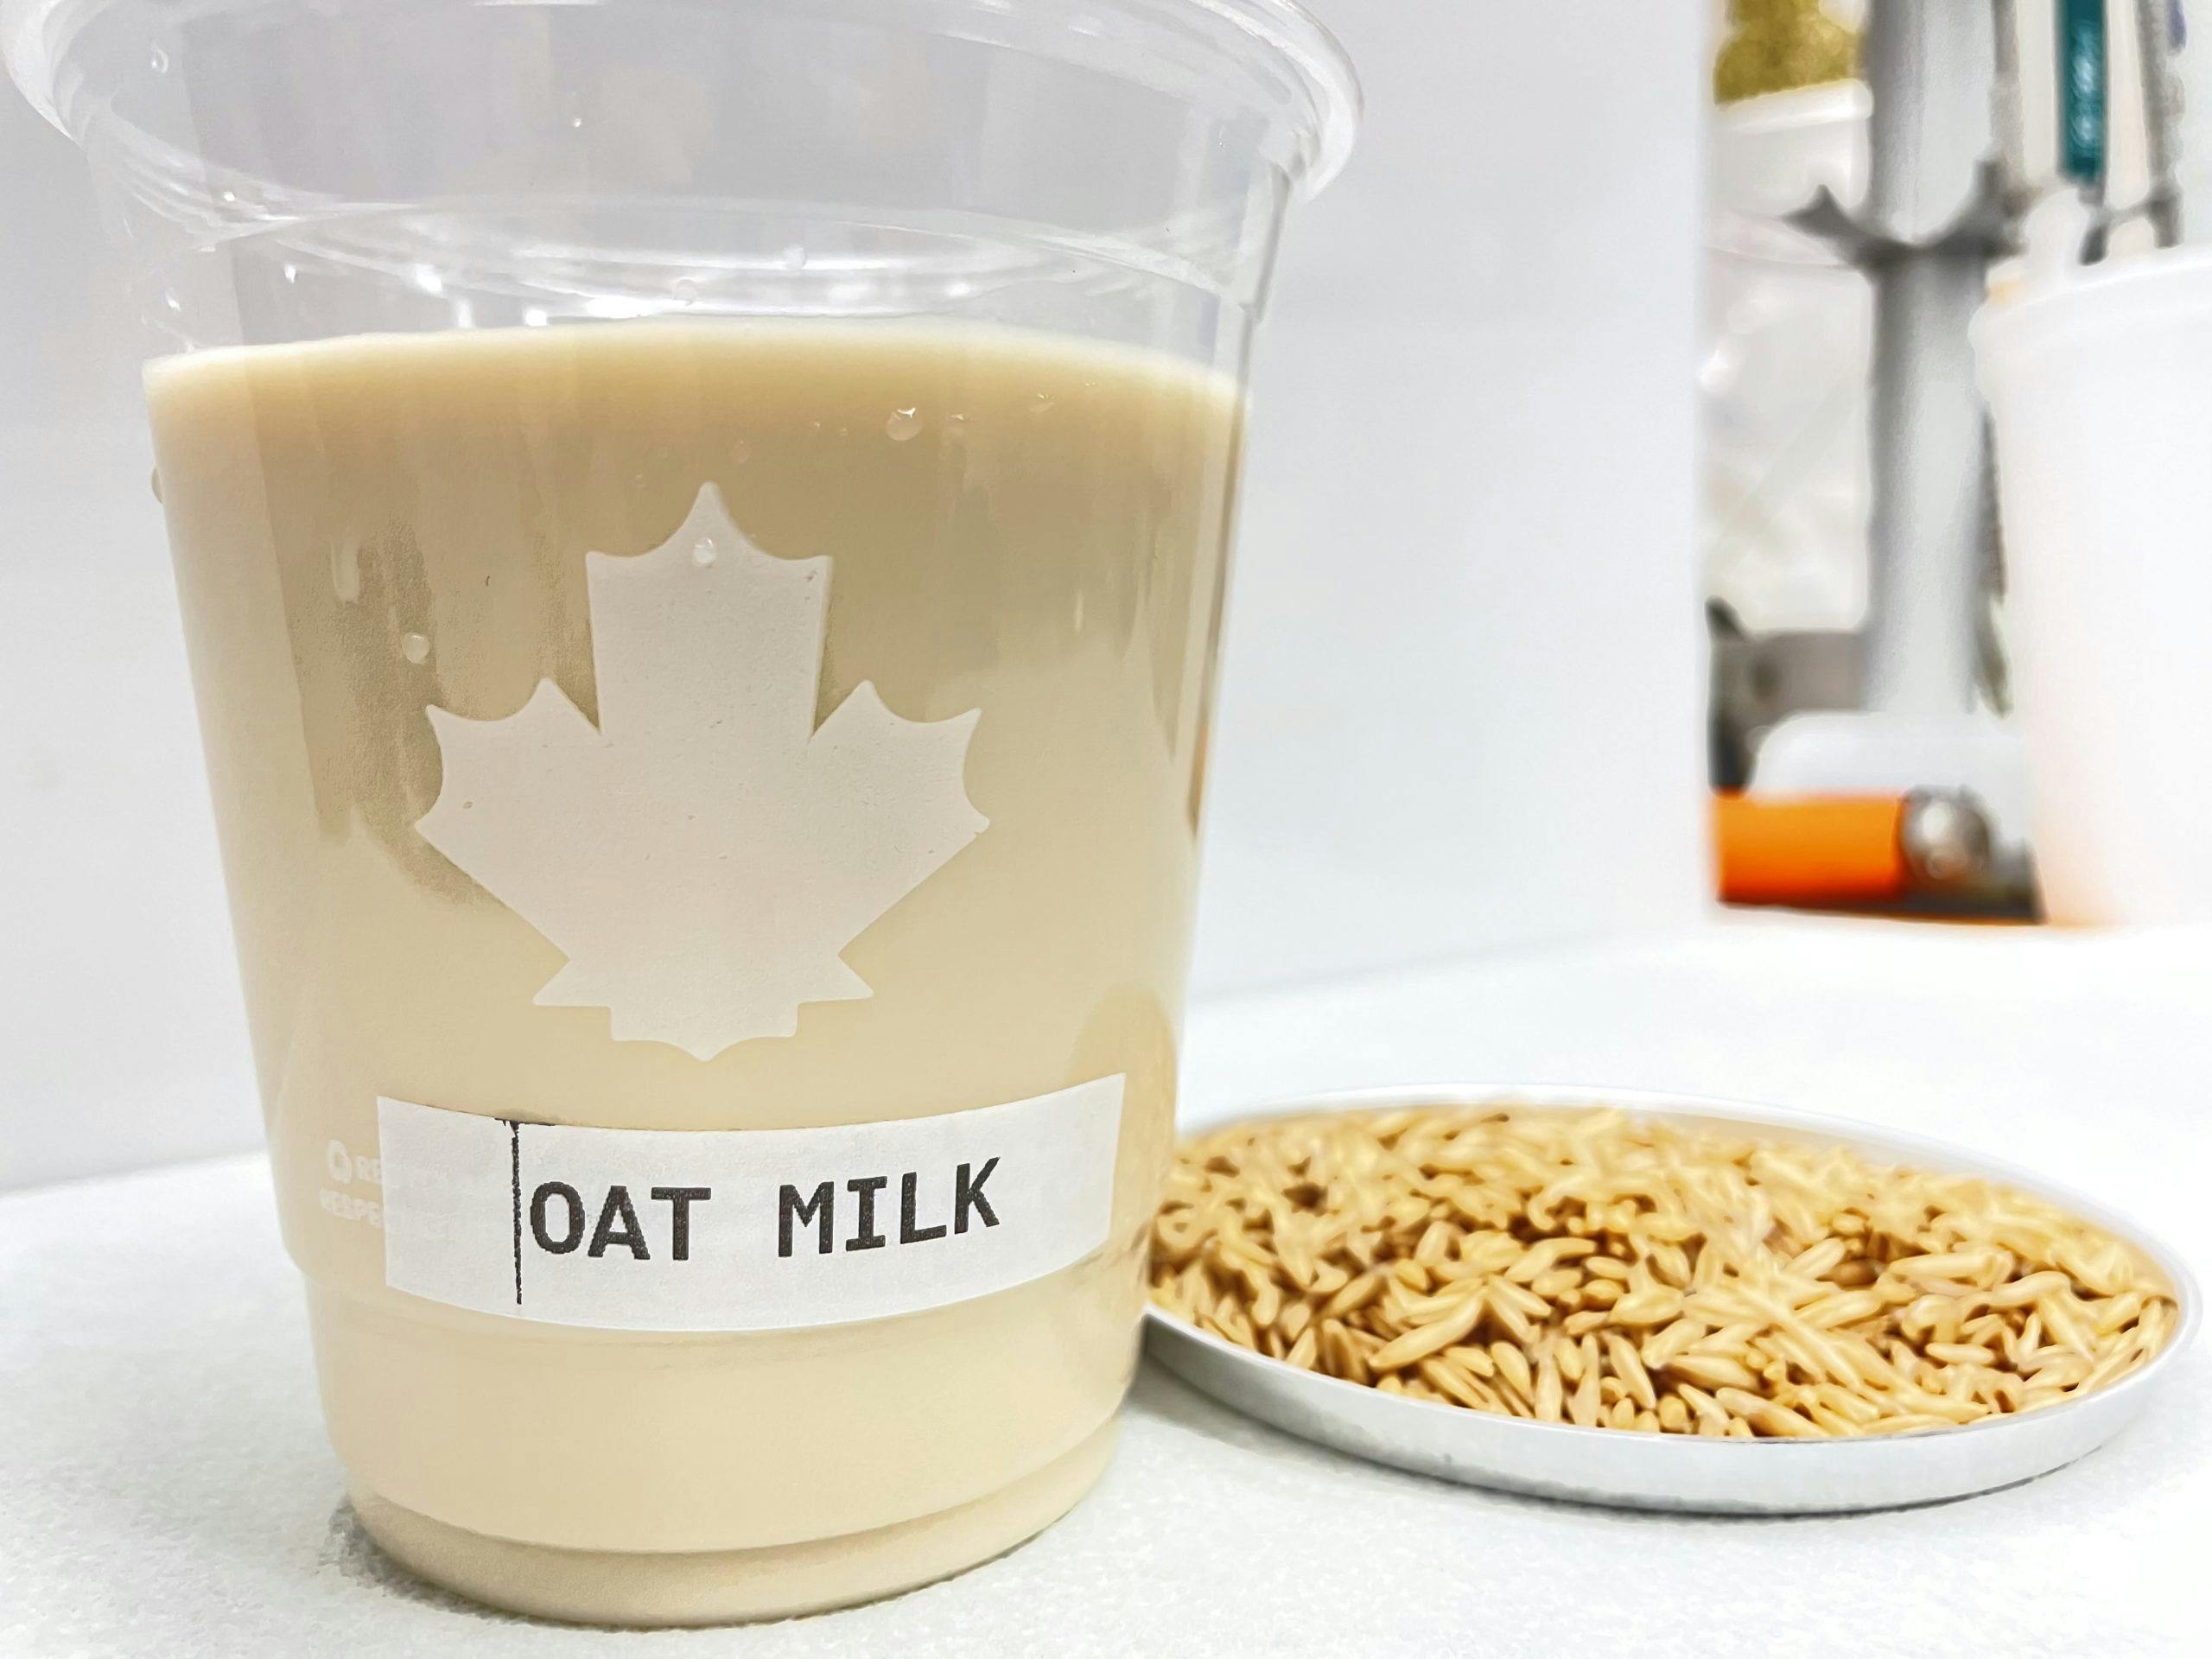 oat-milk-in-plastic-cup-next-to-raw-oat-grains